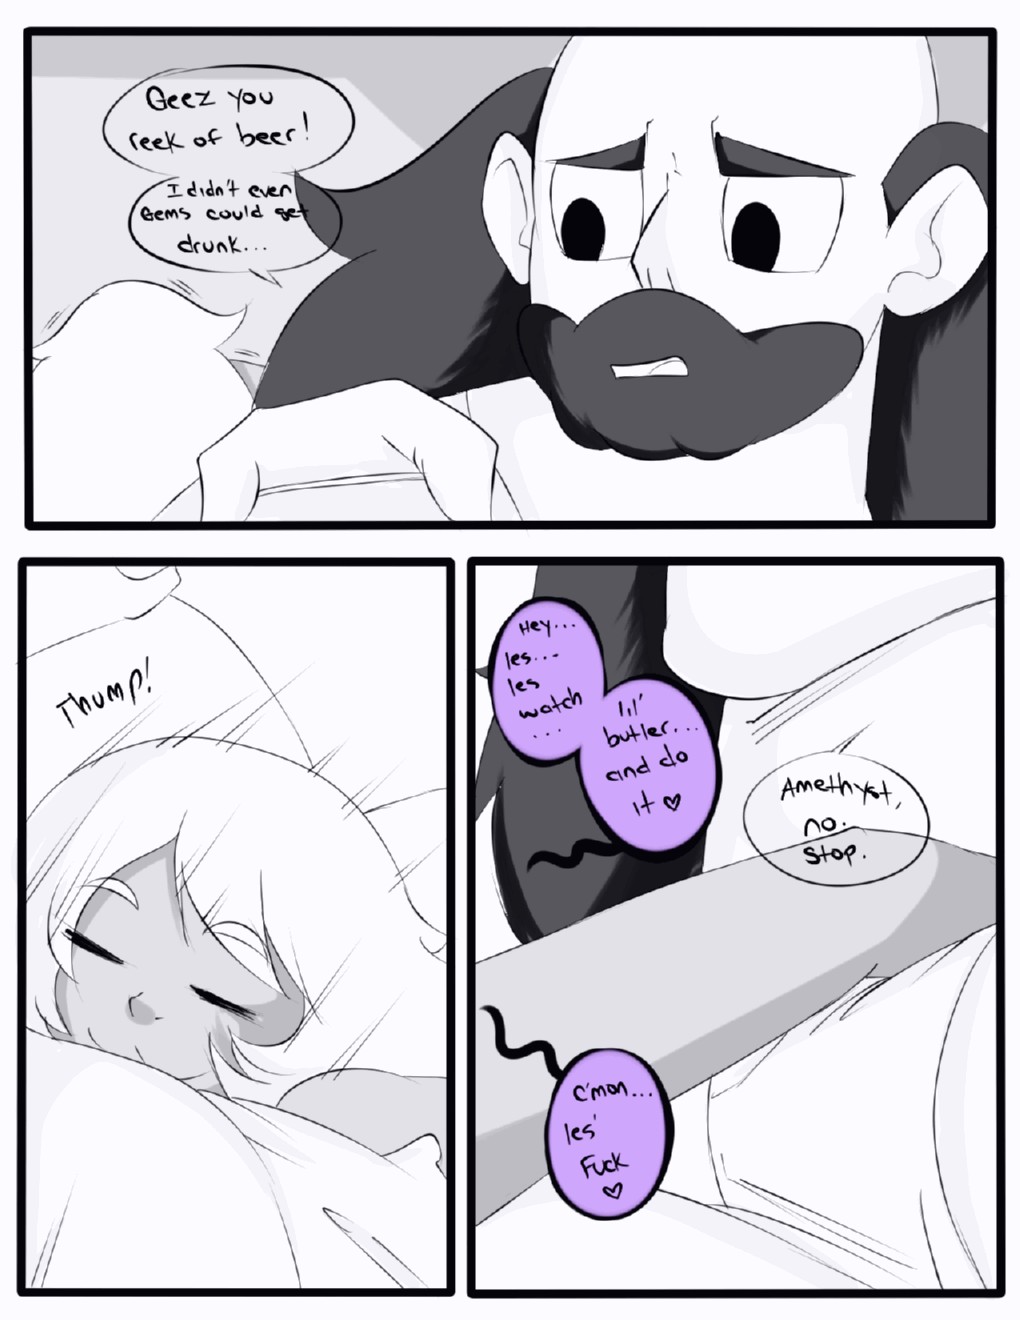 Amethyst's drinking problem porn comic page 002